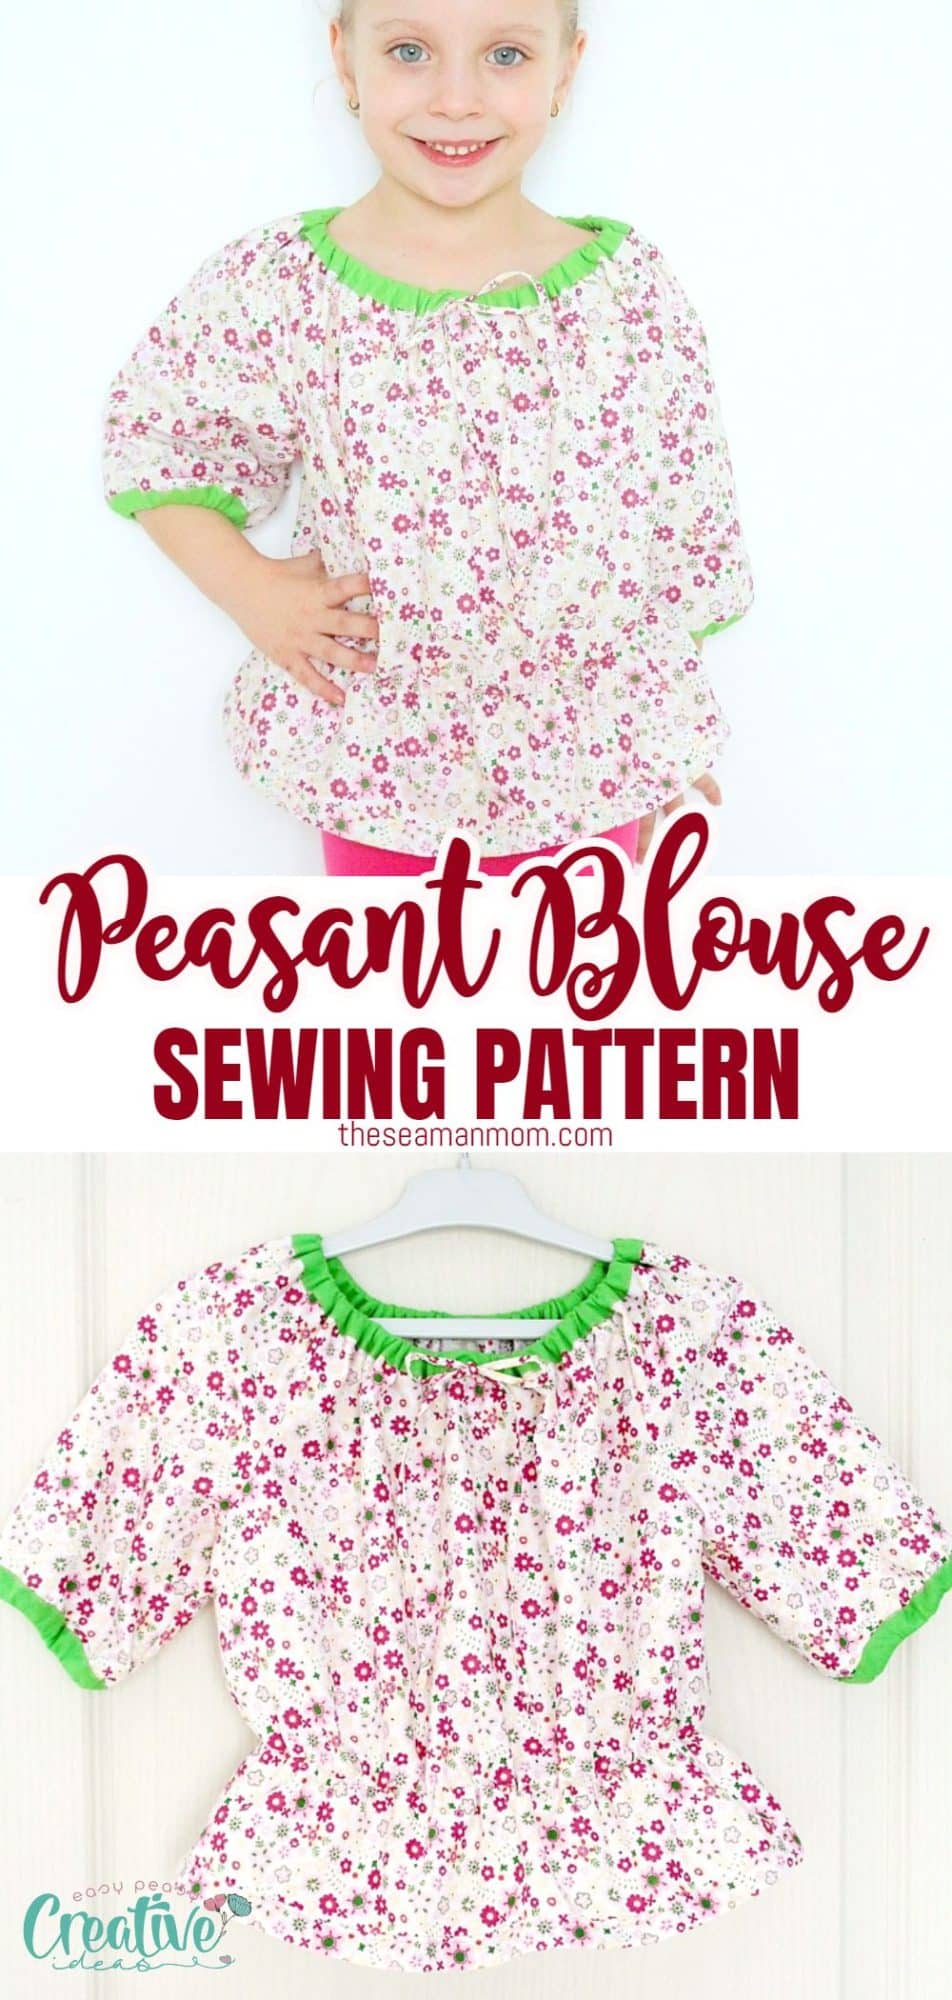 PEASANT BLOUSE PATTERN FOR GIRLS